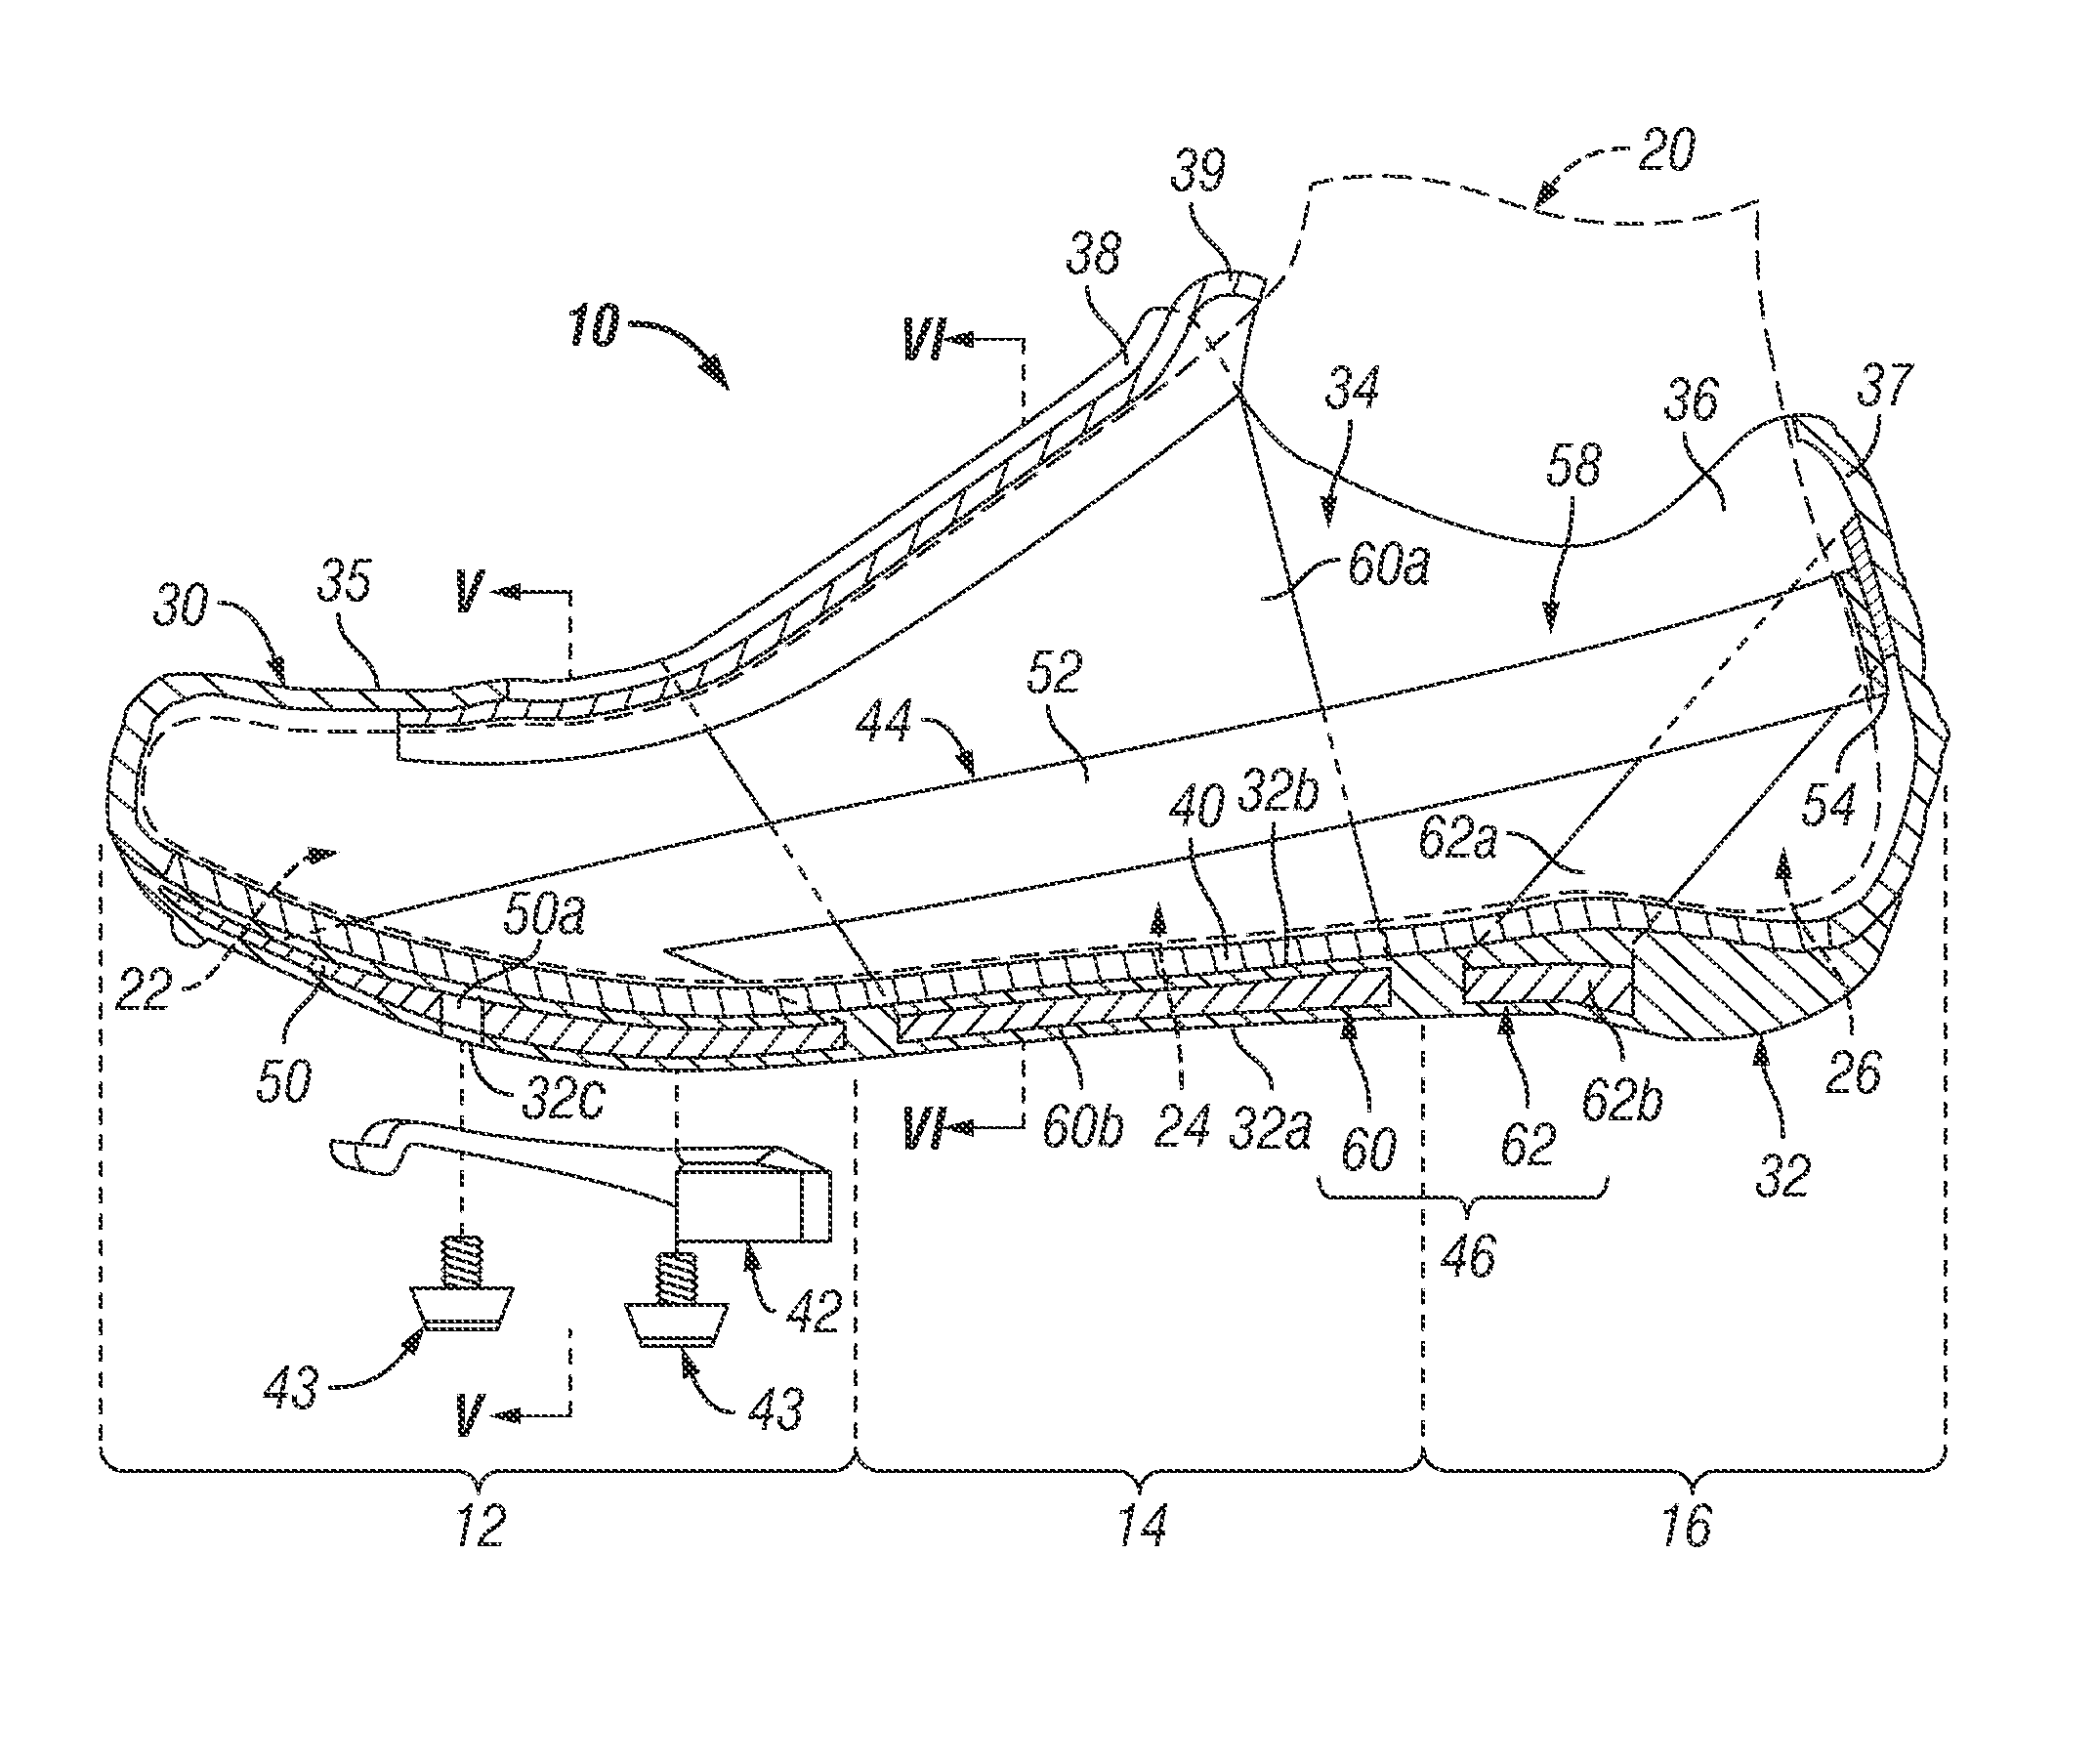 Bicycle shoe support and bicycle shoe